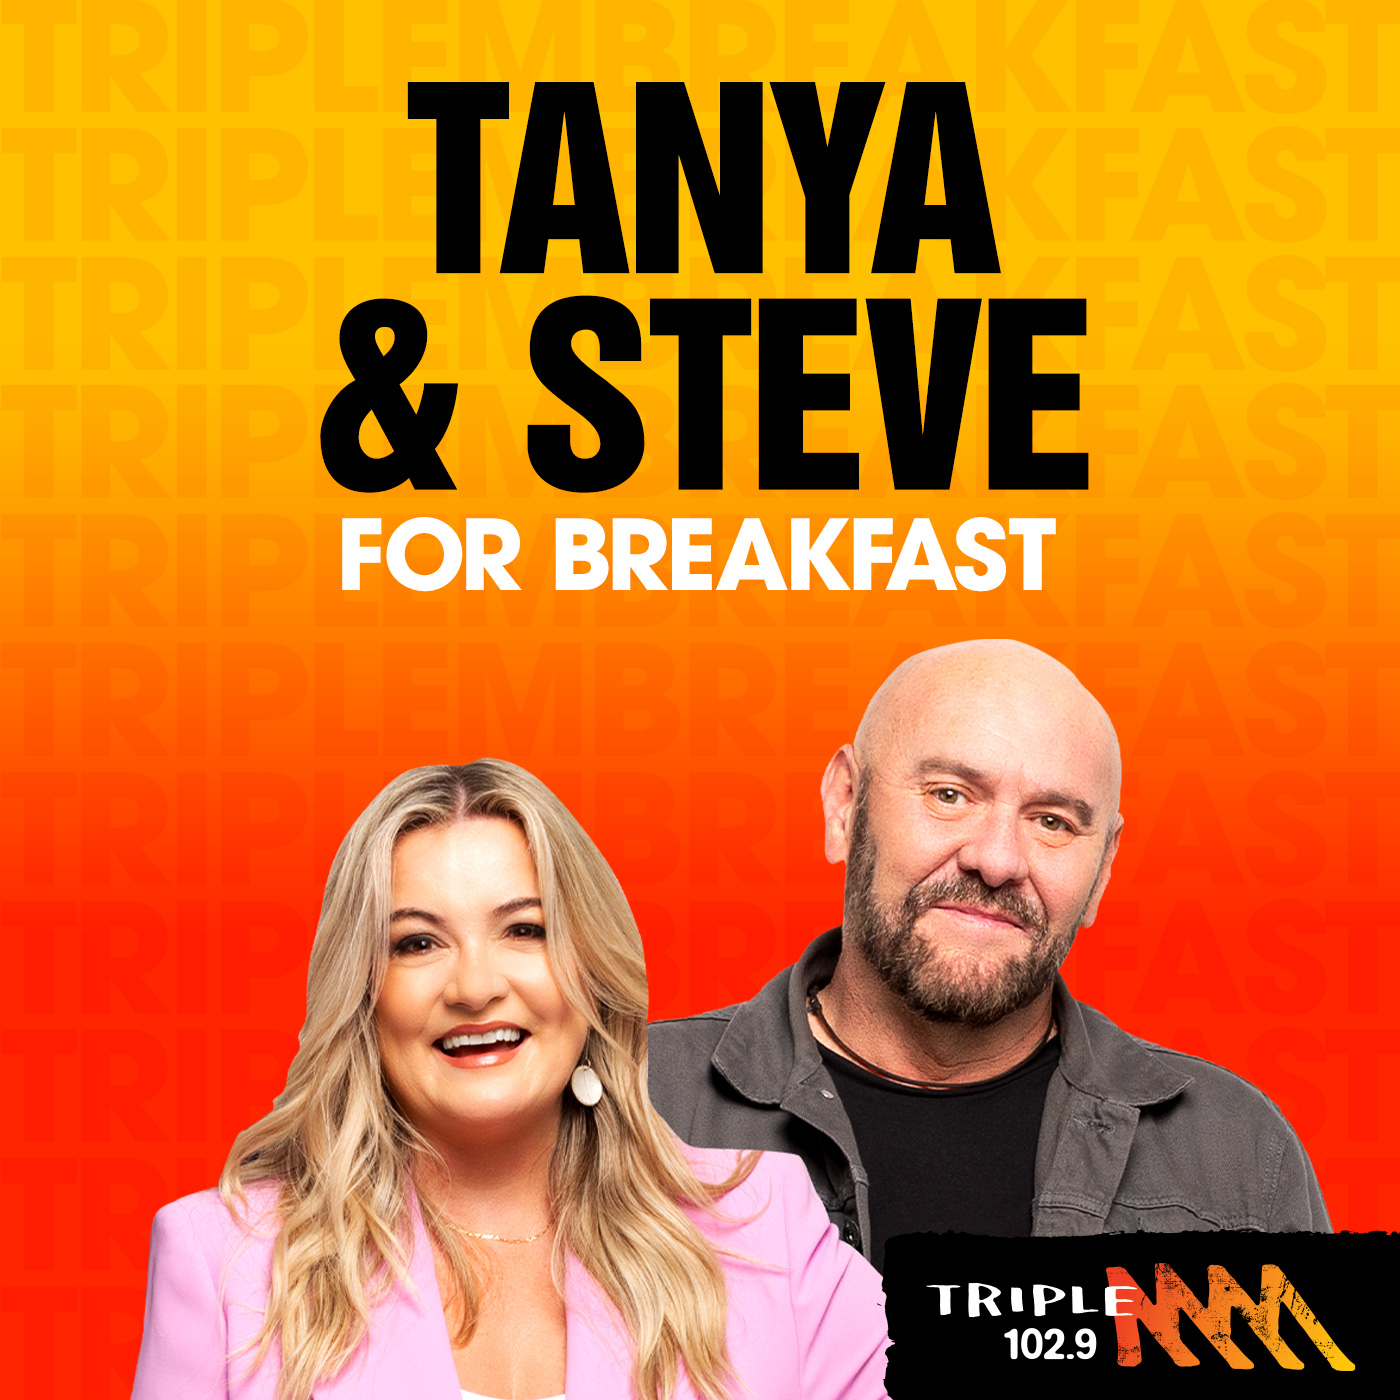 FULL SHOW: Tanya & Steve's 'Little Black Books' - How many have they had?!